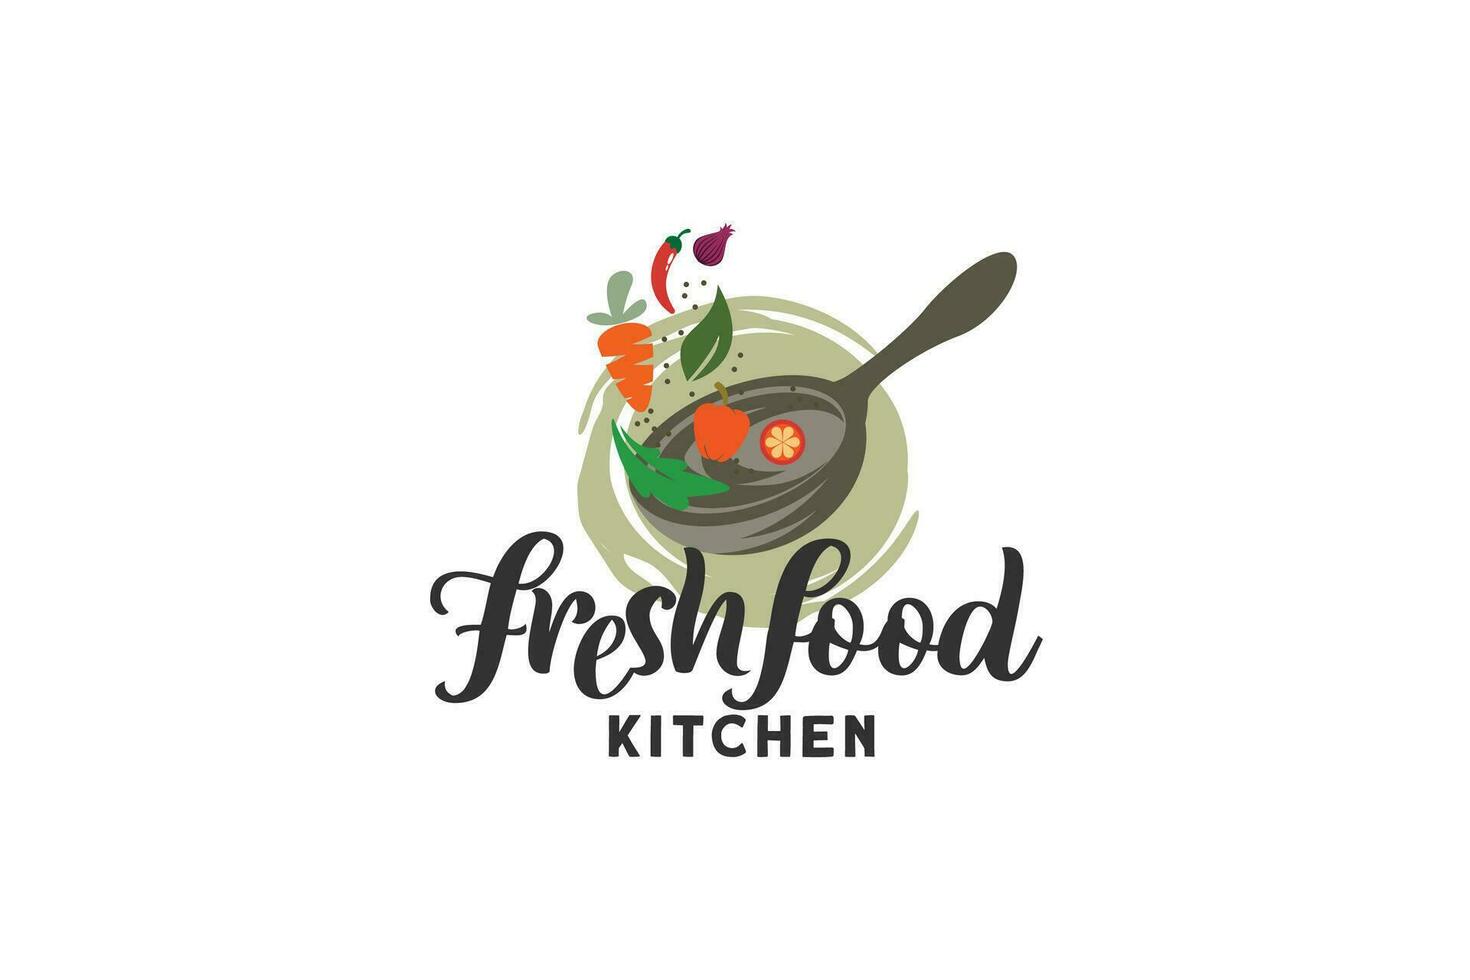 Fresh food kitchen logo with a combination of a frying pan or wok and vegetables. Great for restaurant, cafe, shop, etc. vector